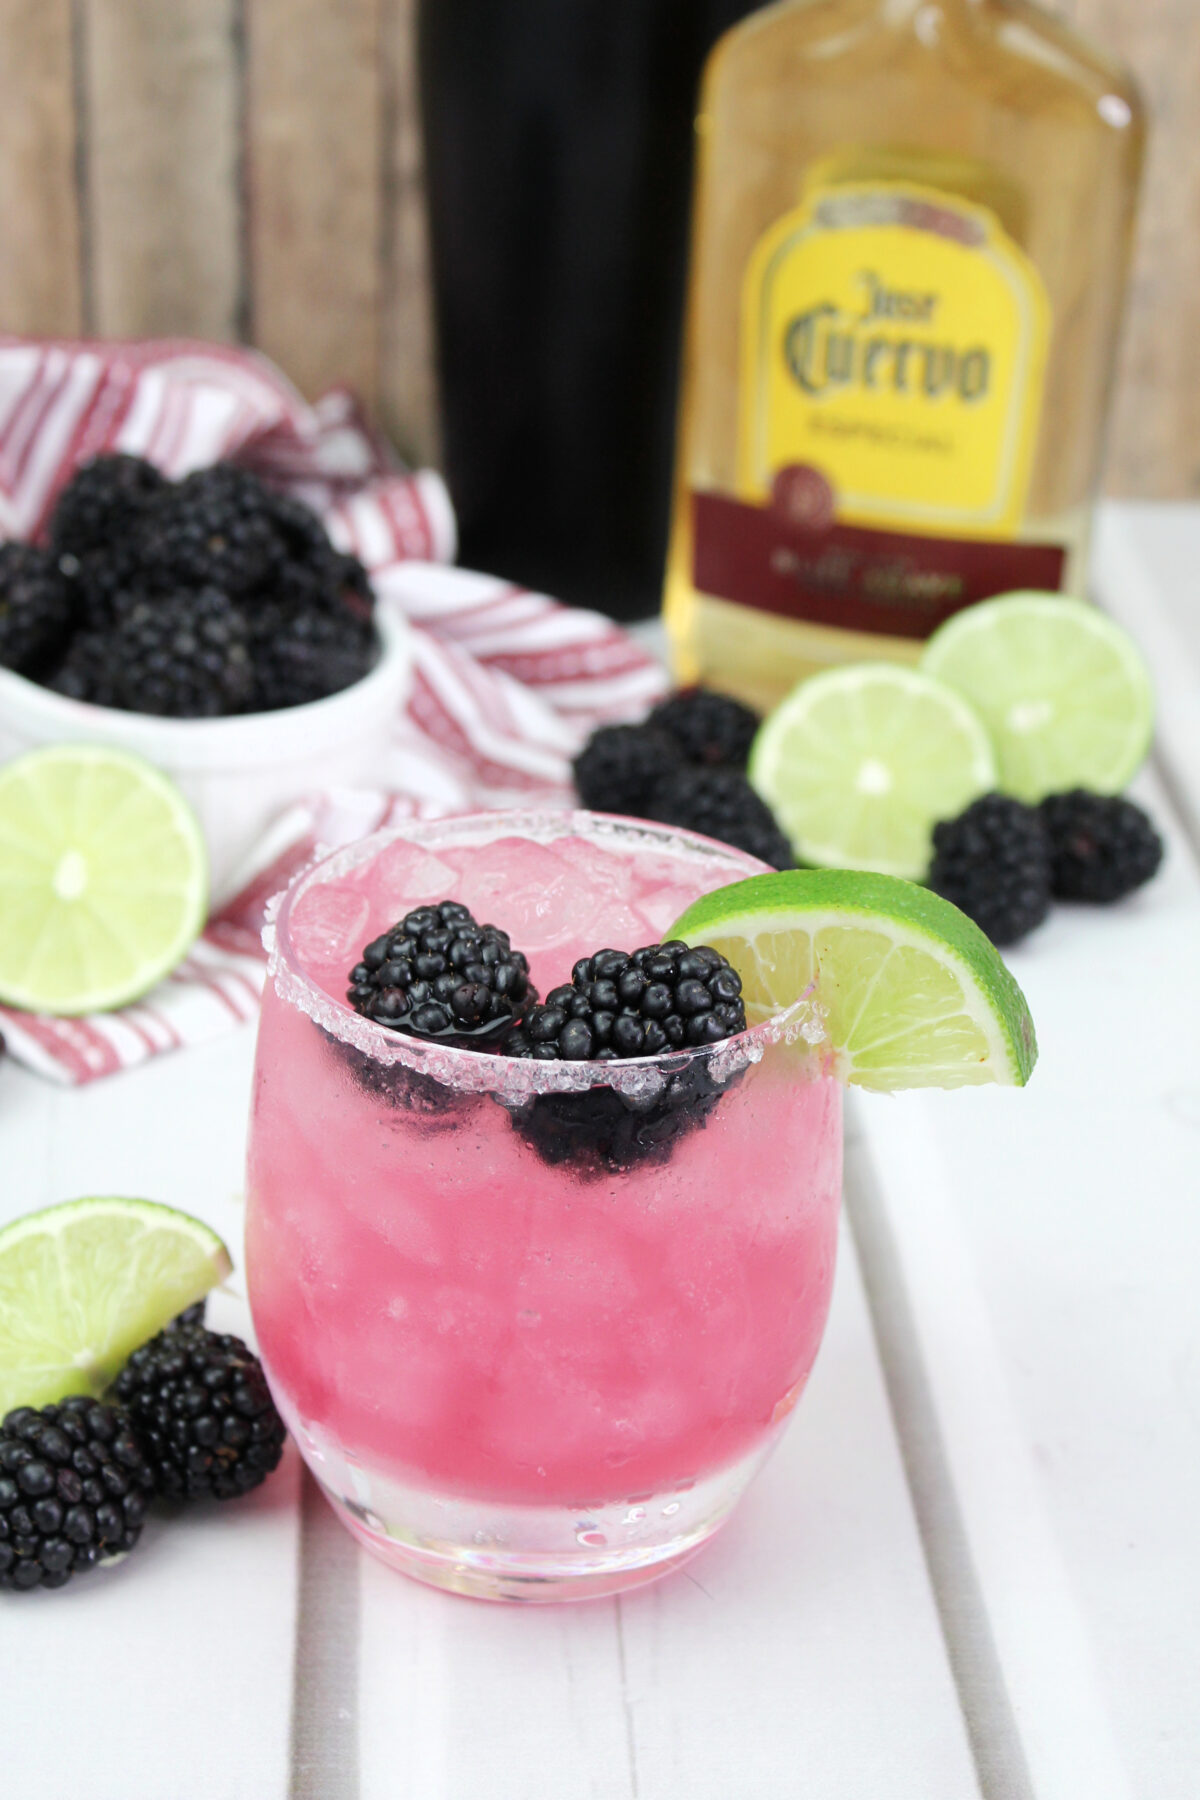 Surprise your friends and family with a unique twist on a classic margarita by using this simple blackberry margarita recipe!